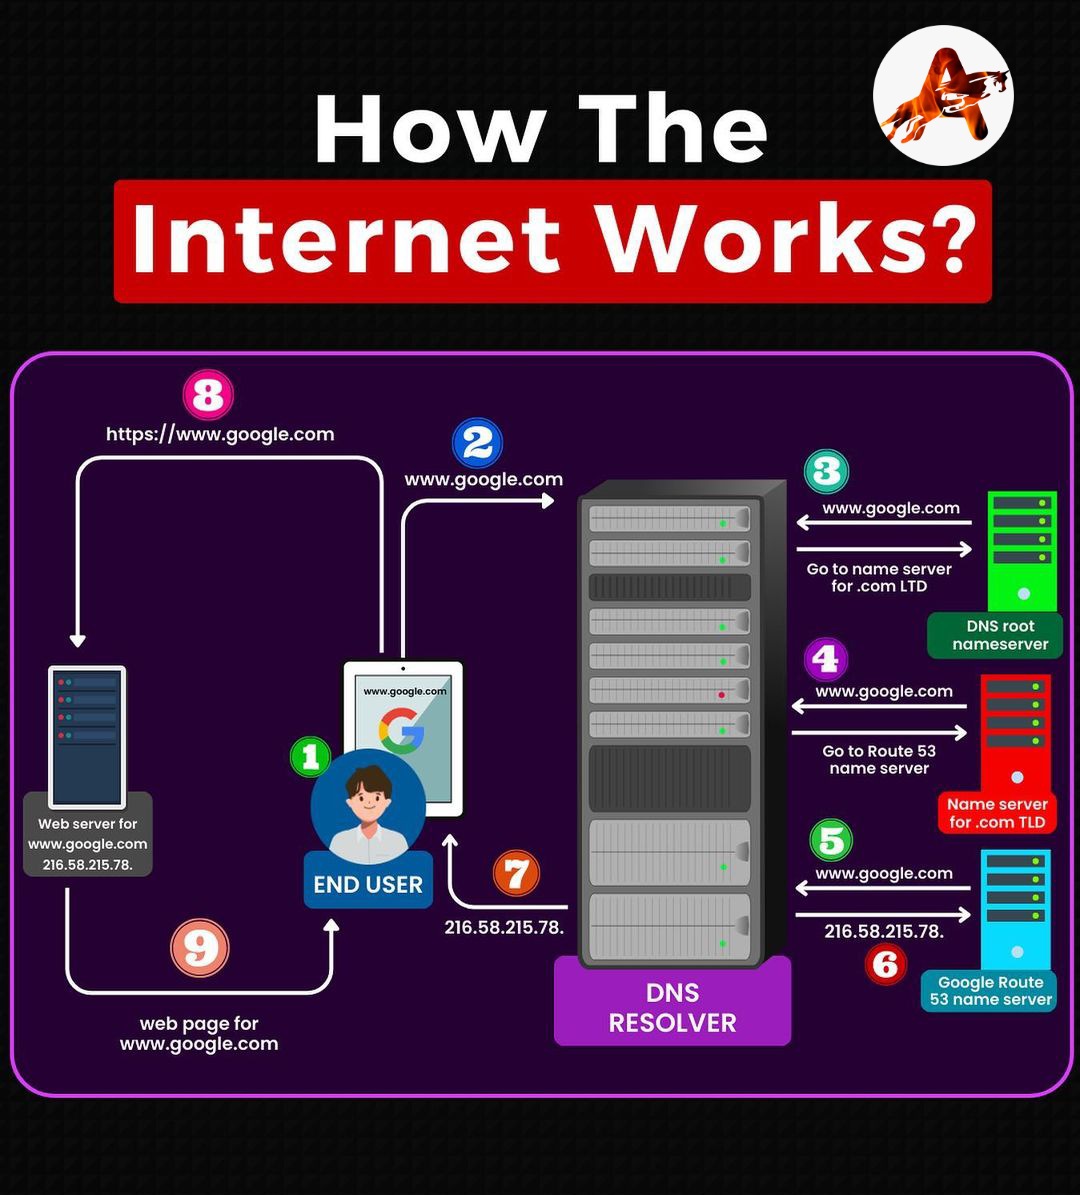 How the internet works????? 
................ 
#HowTheInternetWorks, #InternetBasics, #Networking101, #ComputerNetworking, #CyberSecurity, #CyberSafety, #CyberAwareness, #DigitalEducation, #WebDesign, #NetworkTechnology